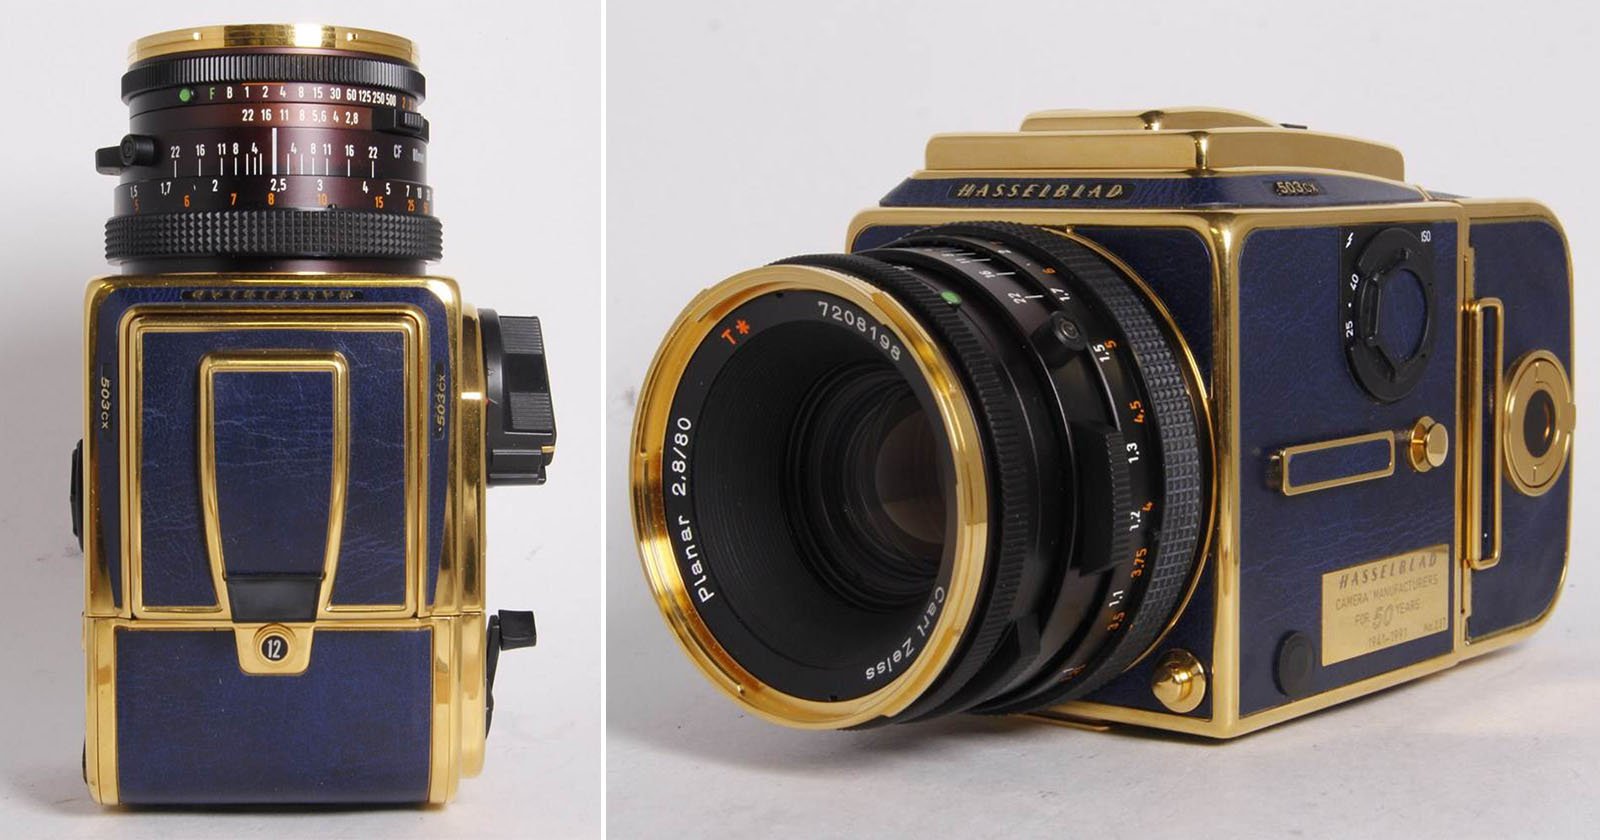 Rare 33-Year-Old Blue and Gold Hasselblad Camera Appears for Sale